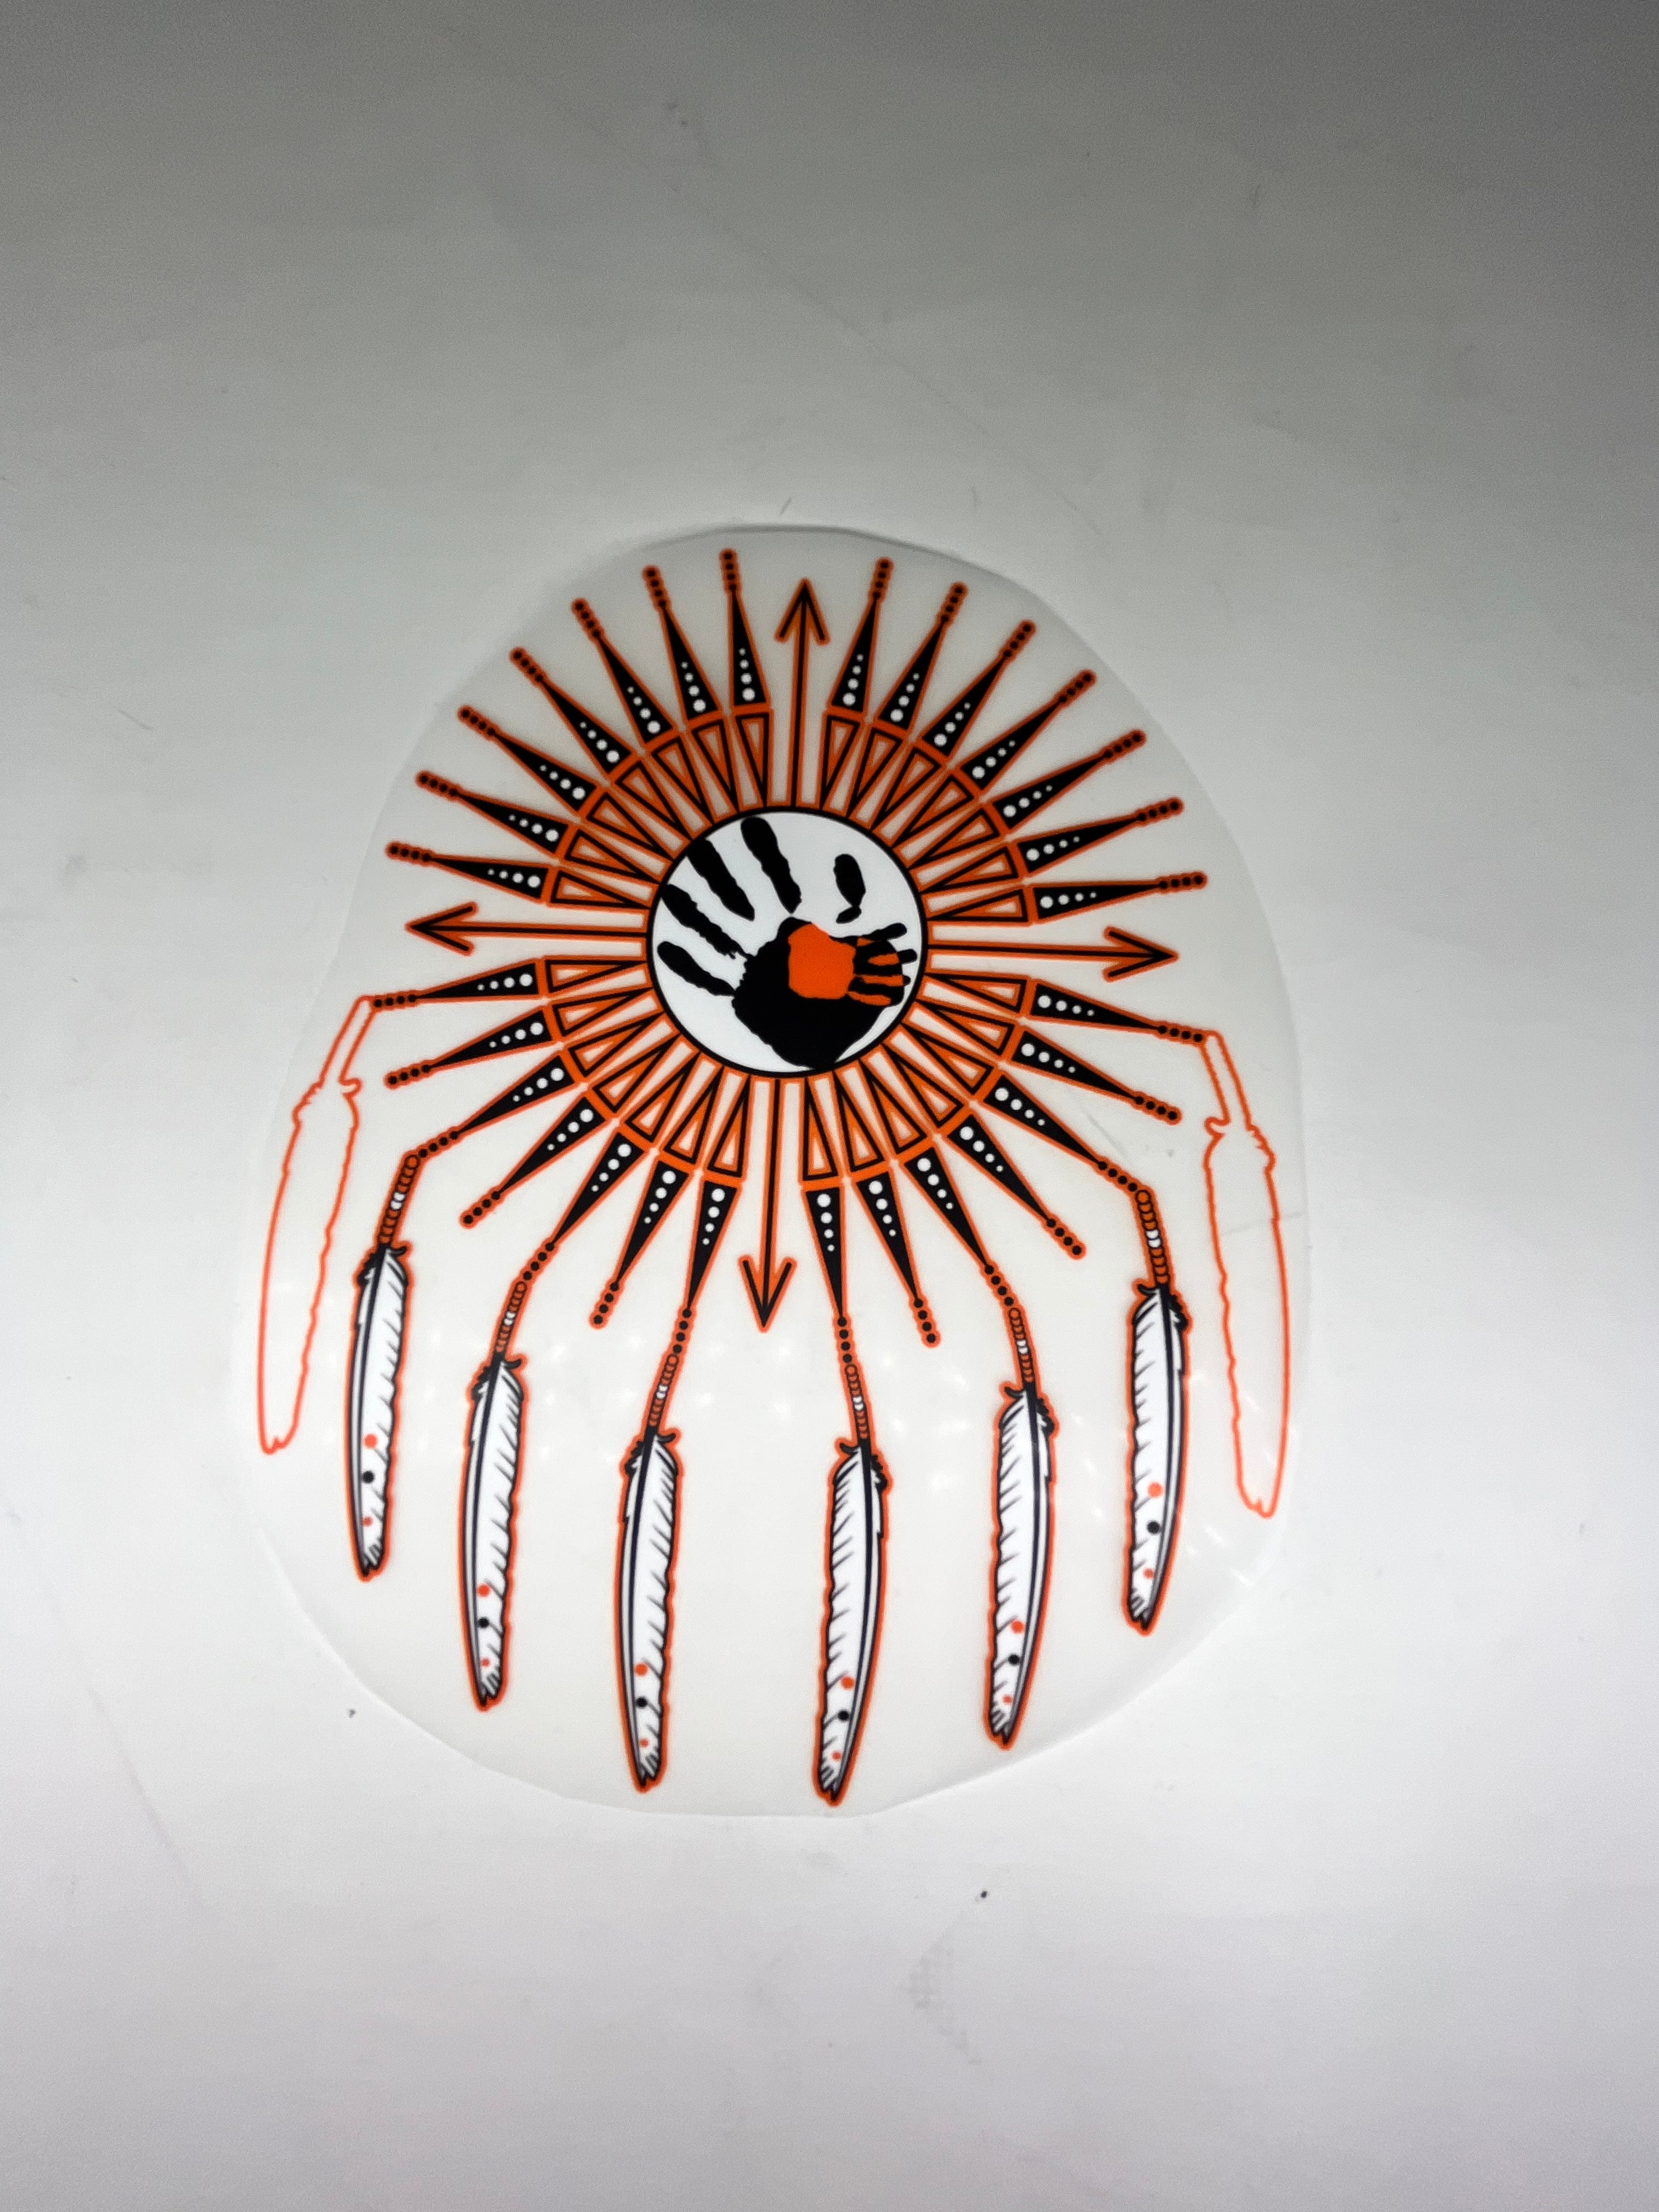 14 IN Every Child Matters Dreamcatcher w Feathers